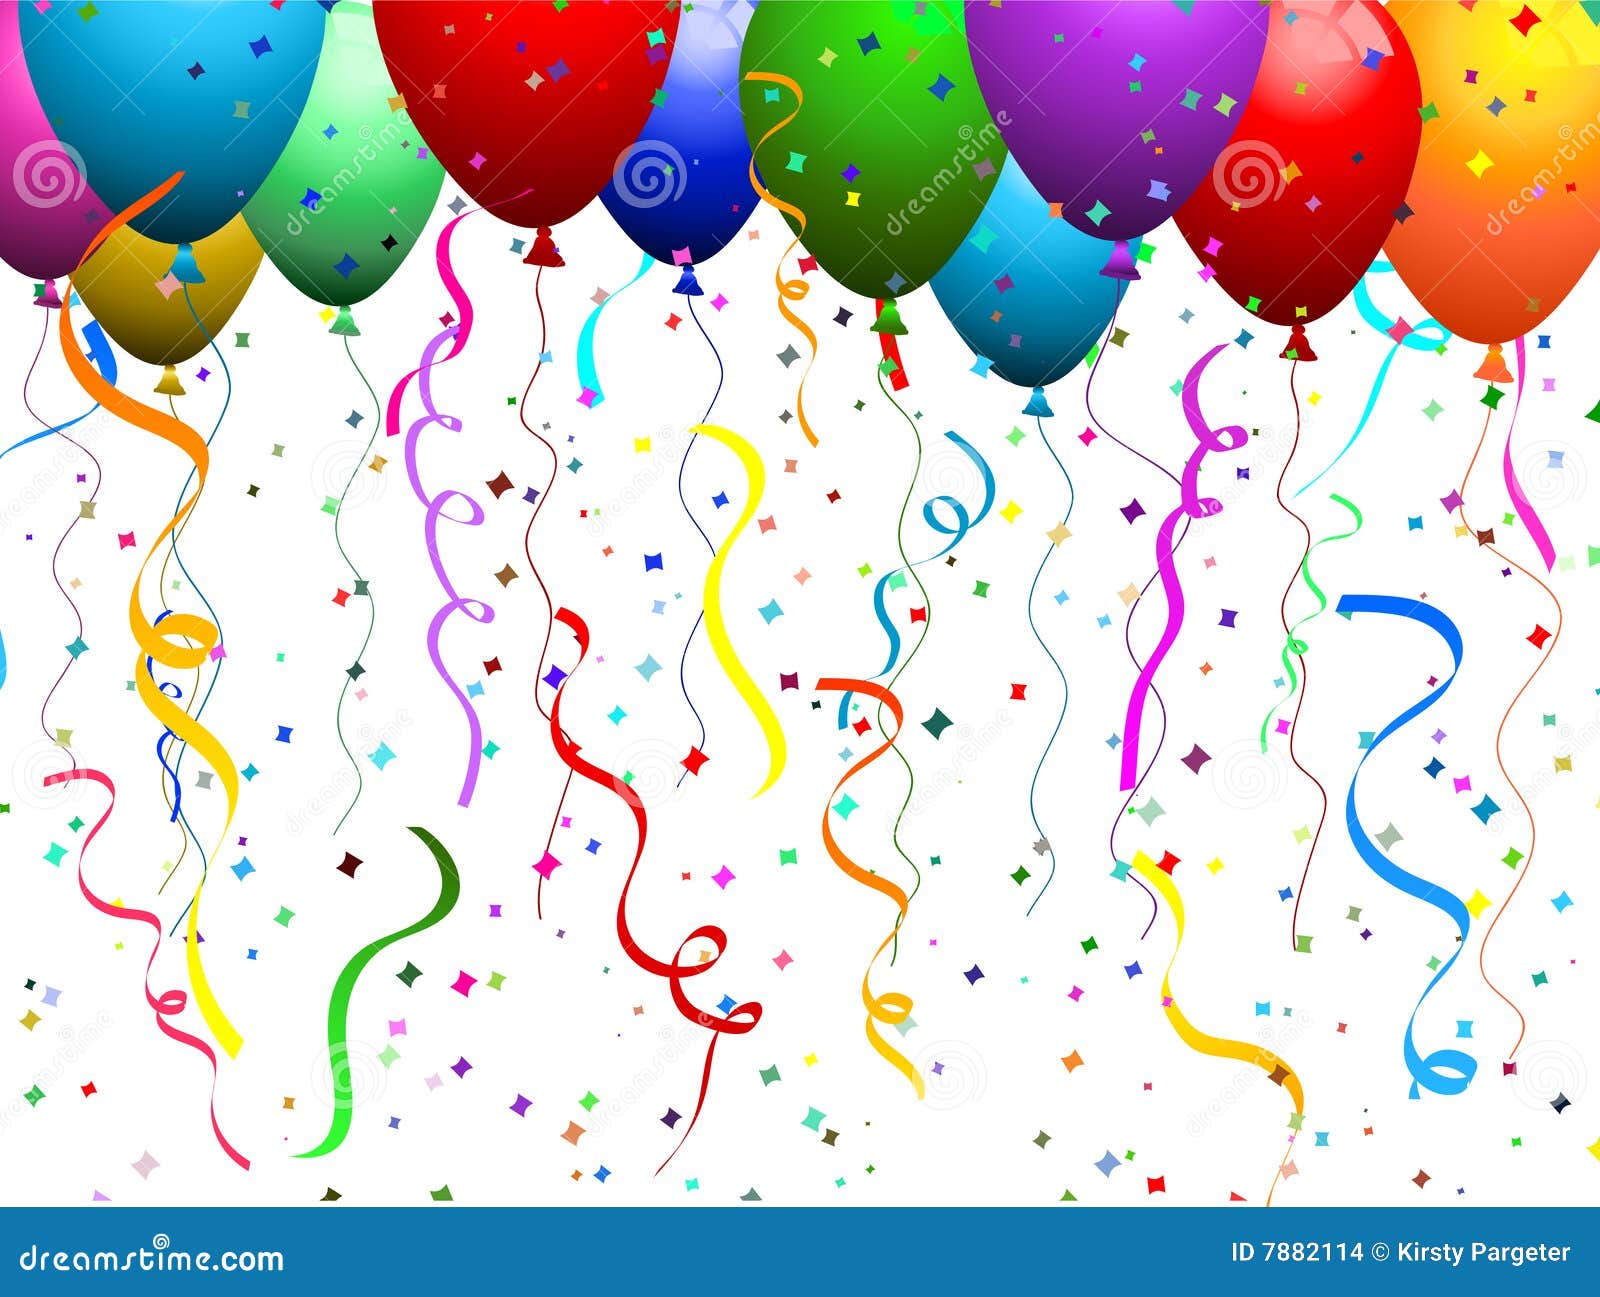  Balloons  and confetti  stock vector Illustration of 